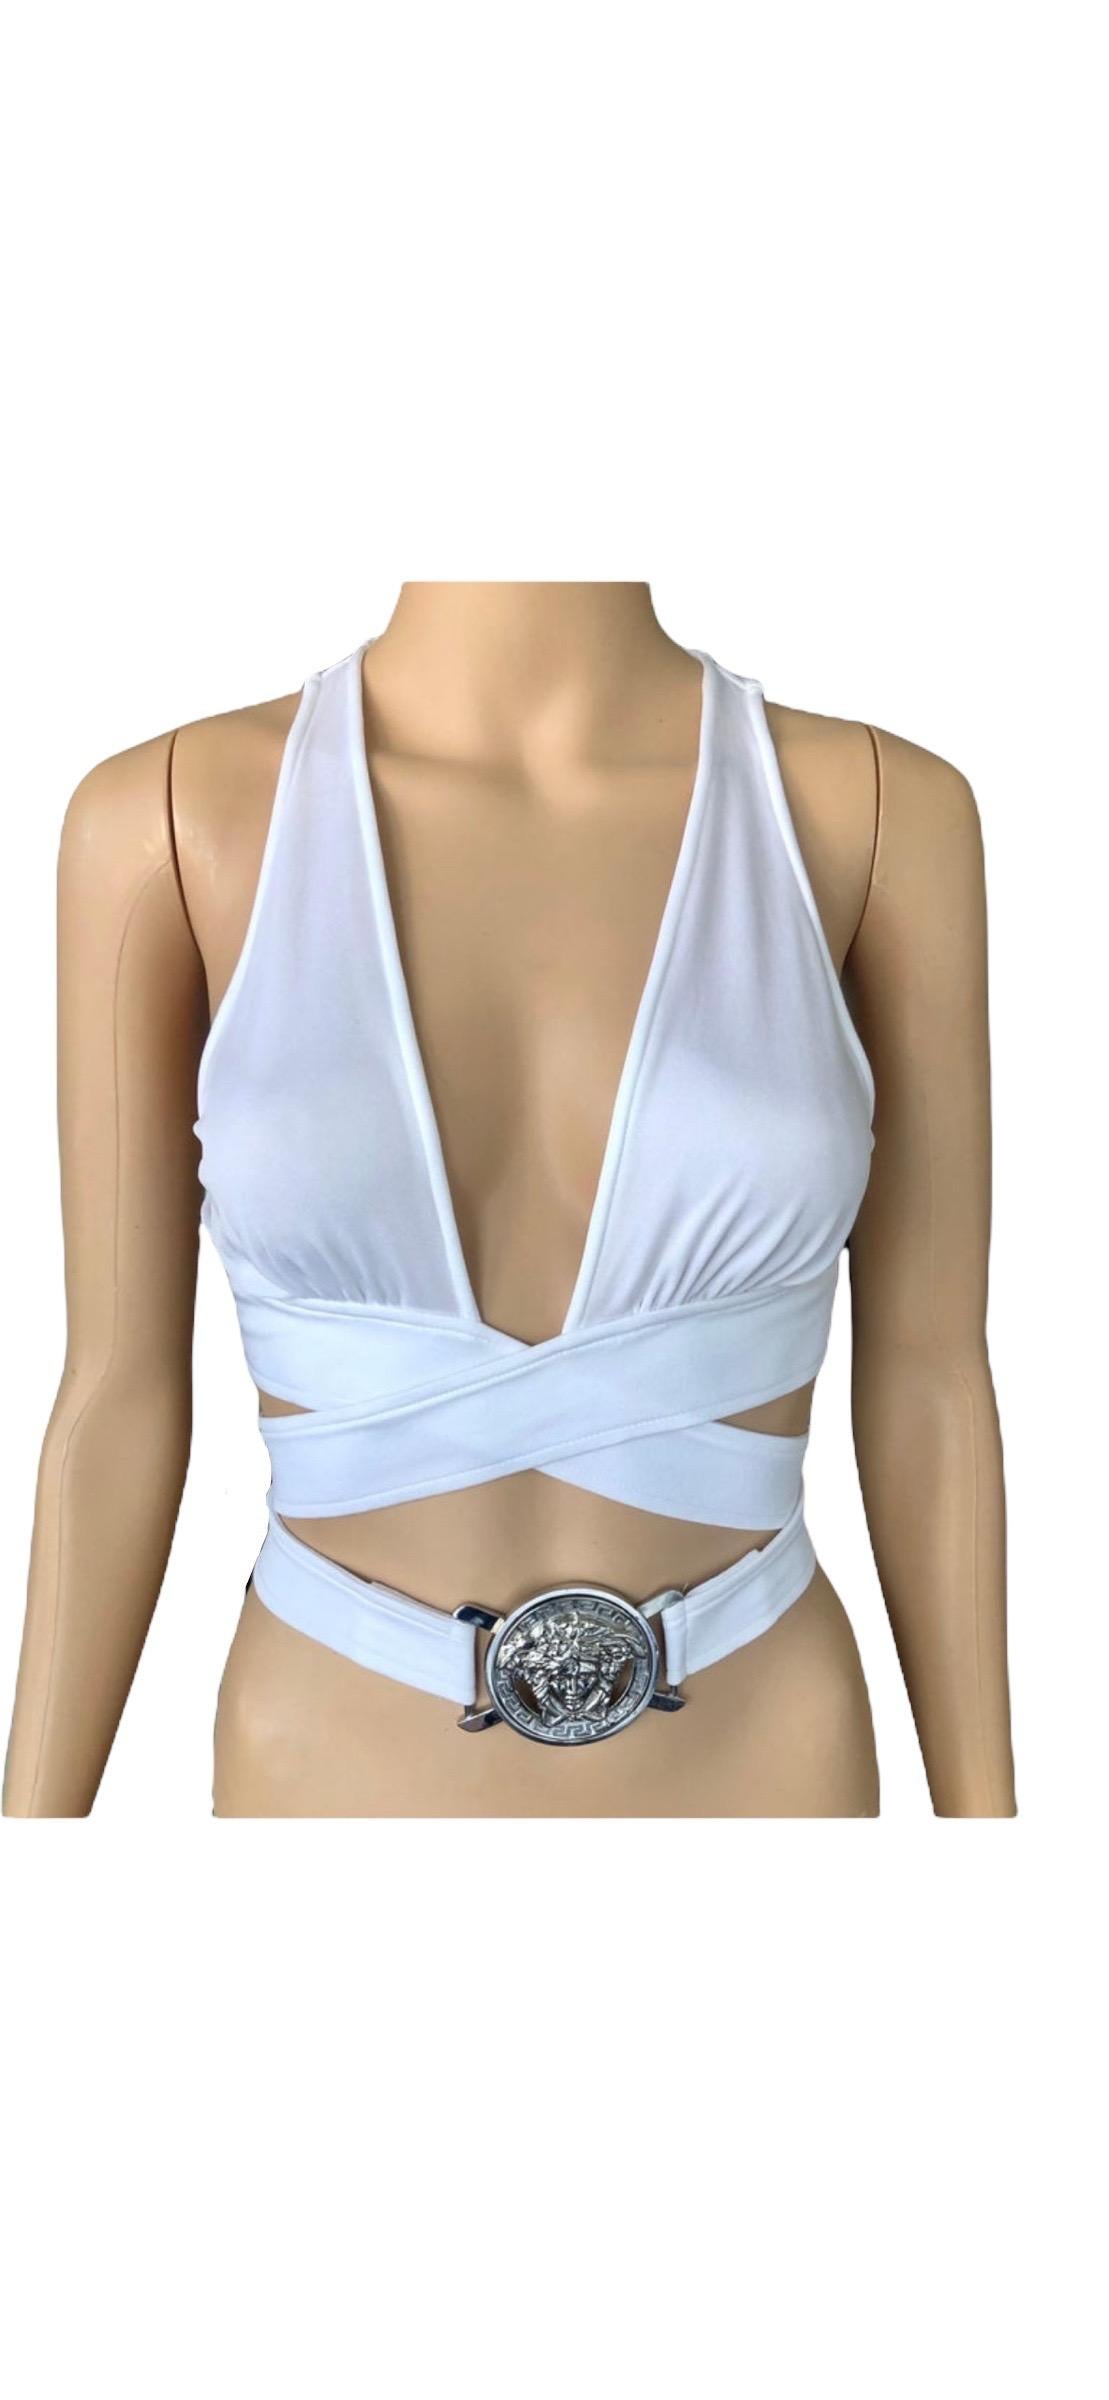 Versace S/S 2005 Plunging Wrap Crop Top For Sale 1